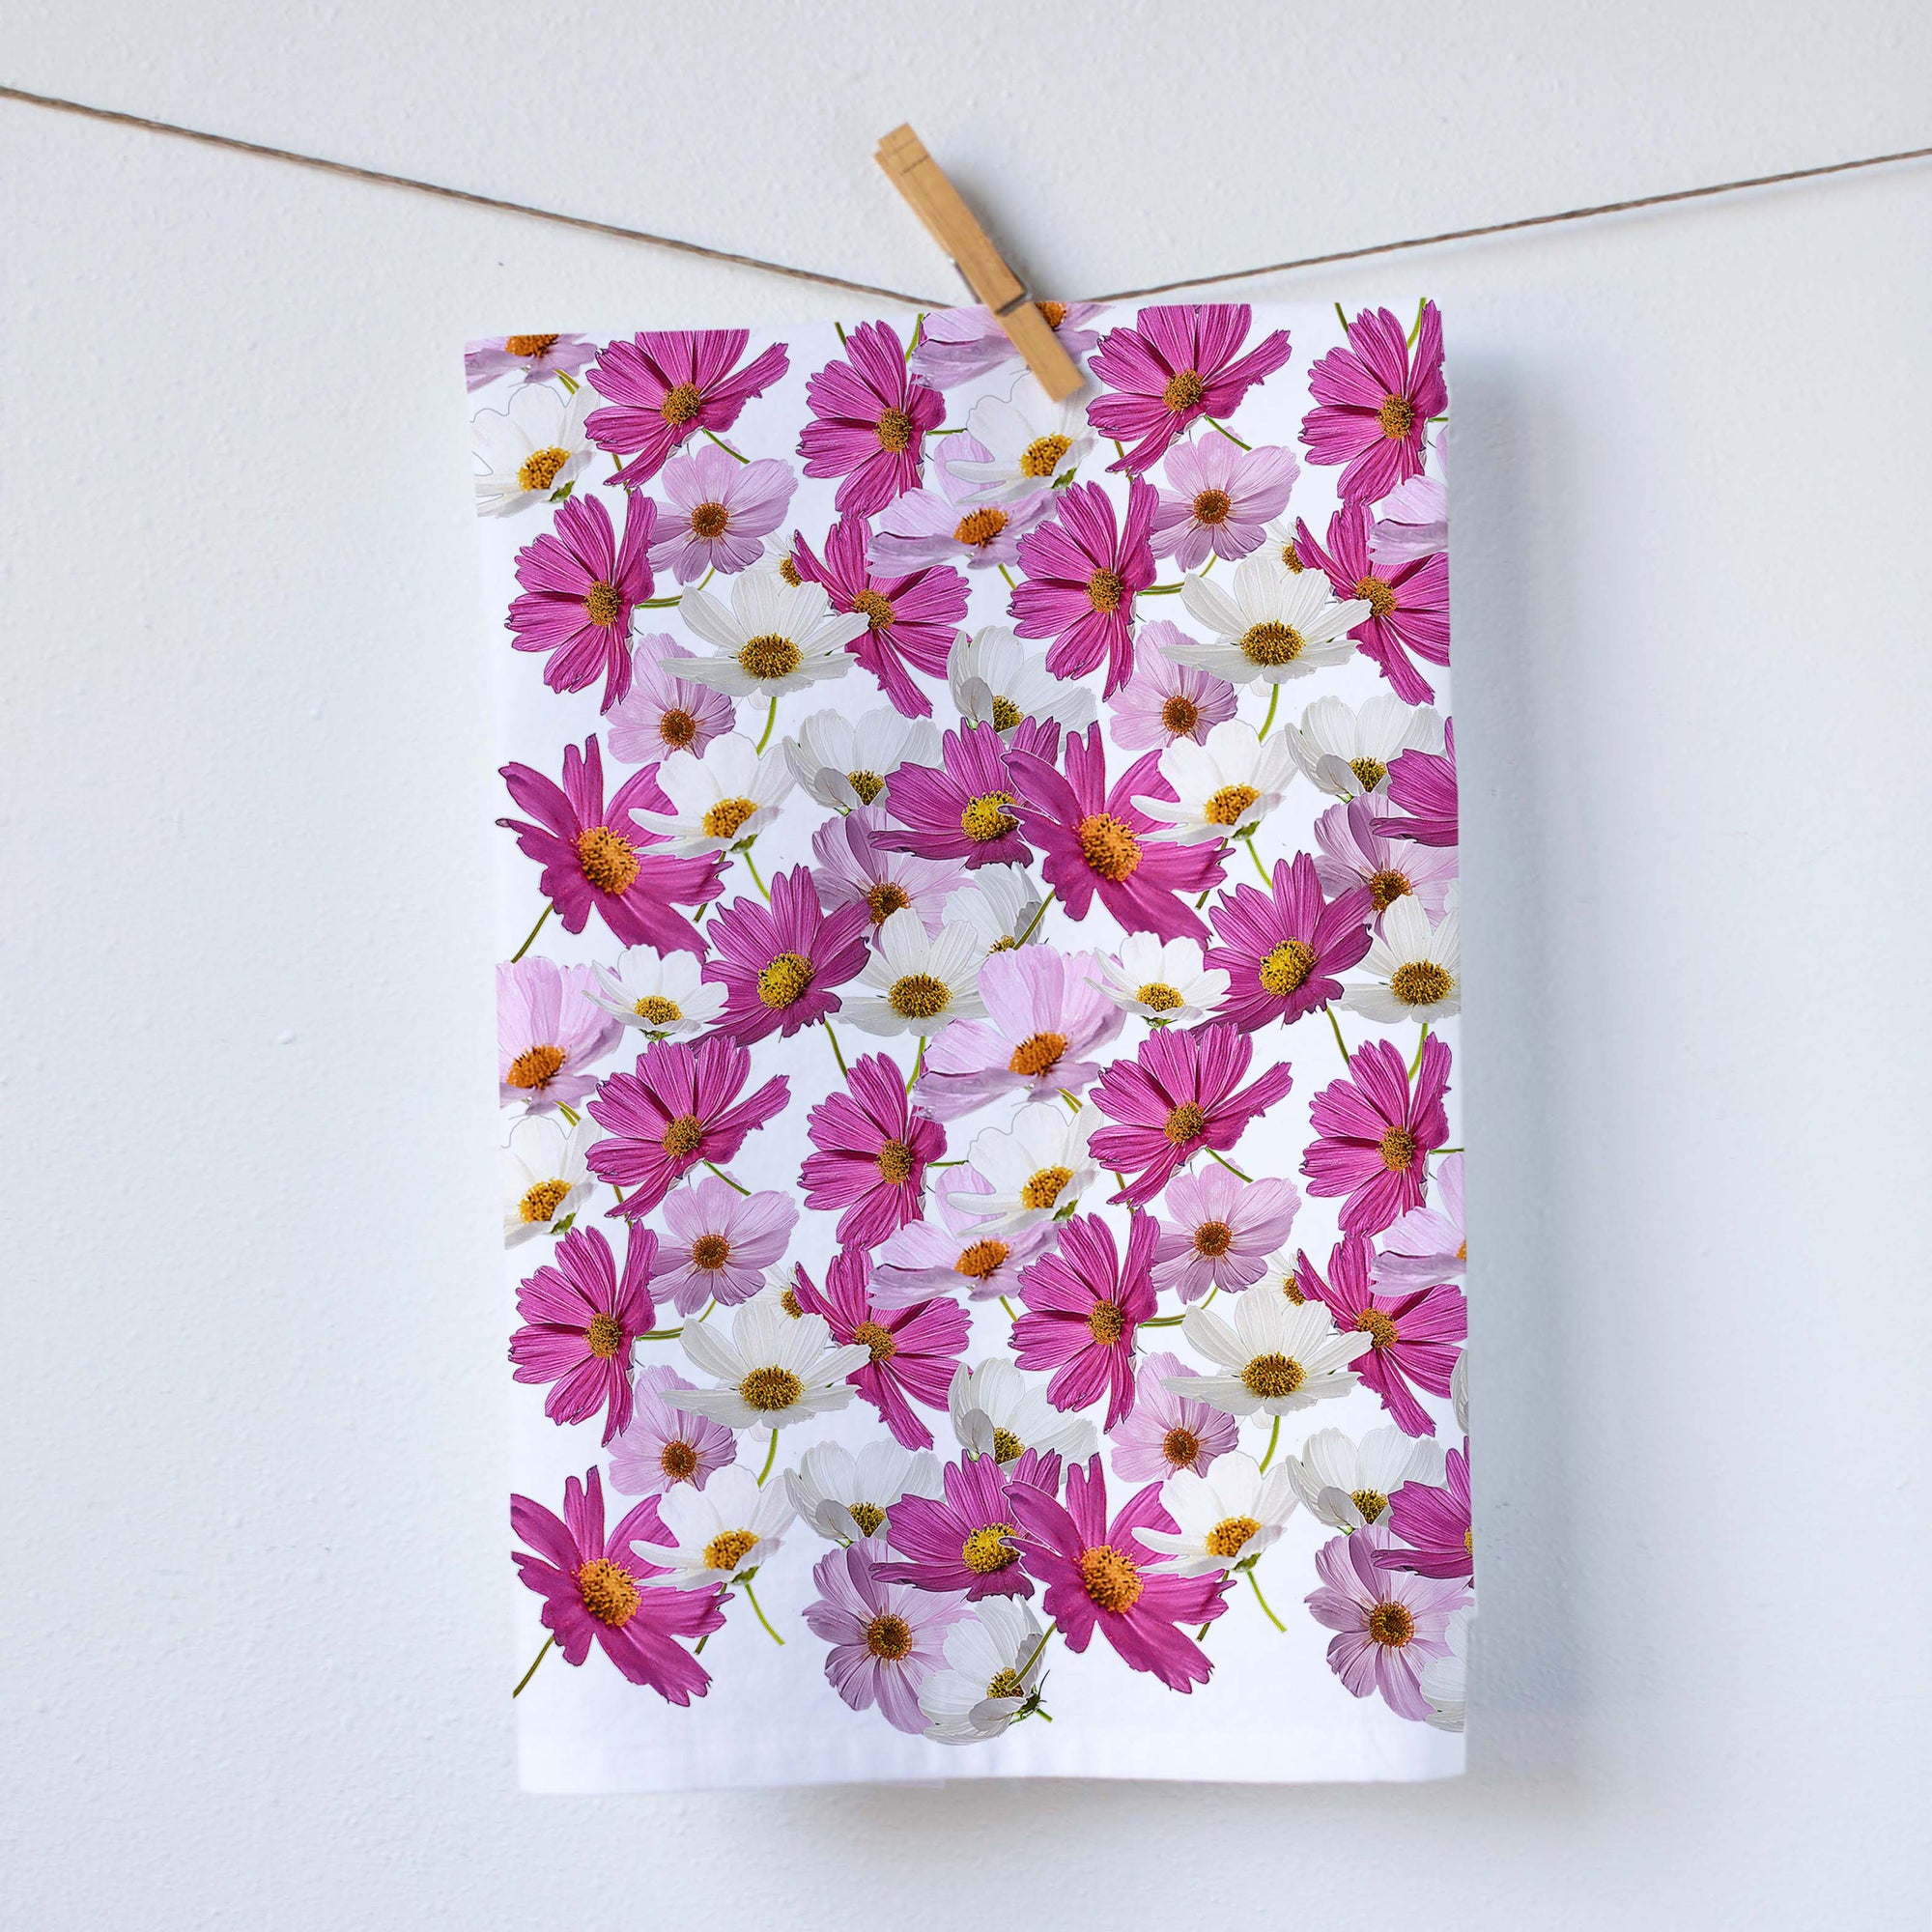 White, pink, and purple cosmo flower kitchen towel. 100% cotton linen. Photography by Pauline Stevens. Hostess Gift. 19"x 28"